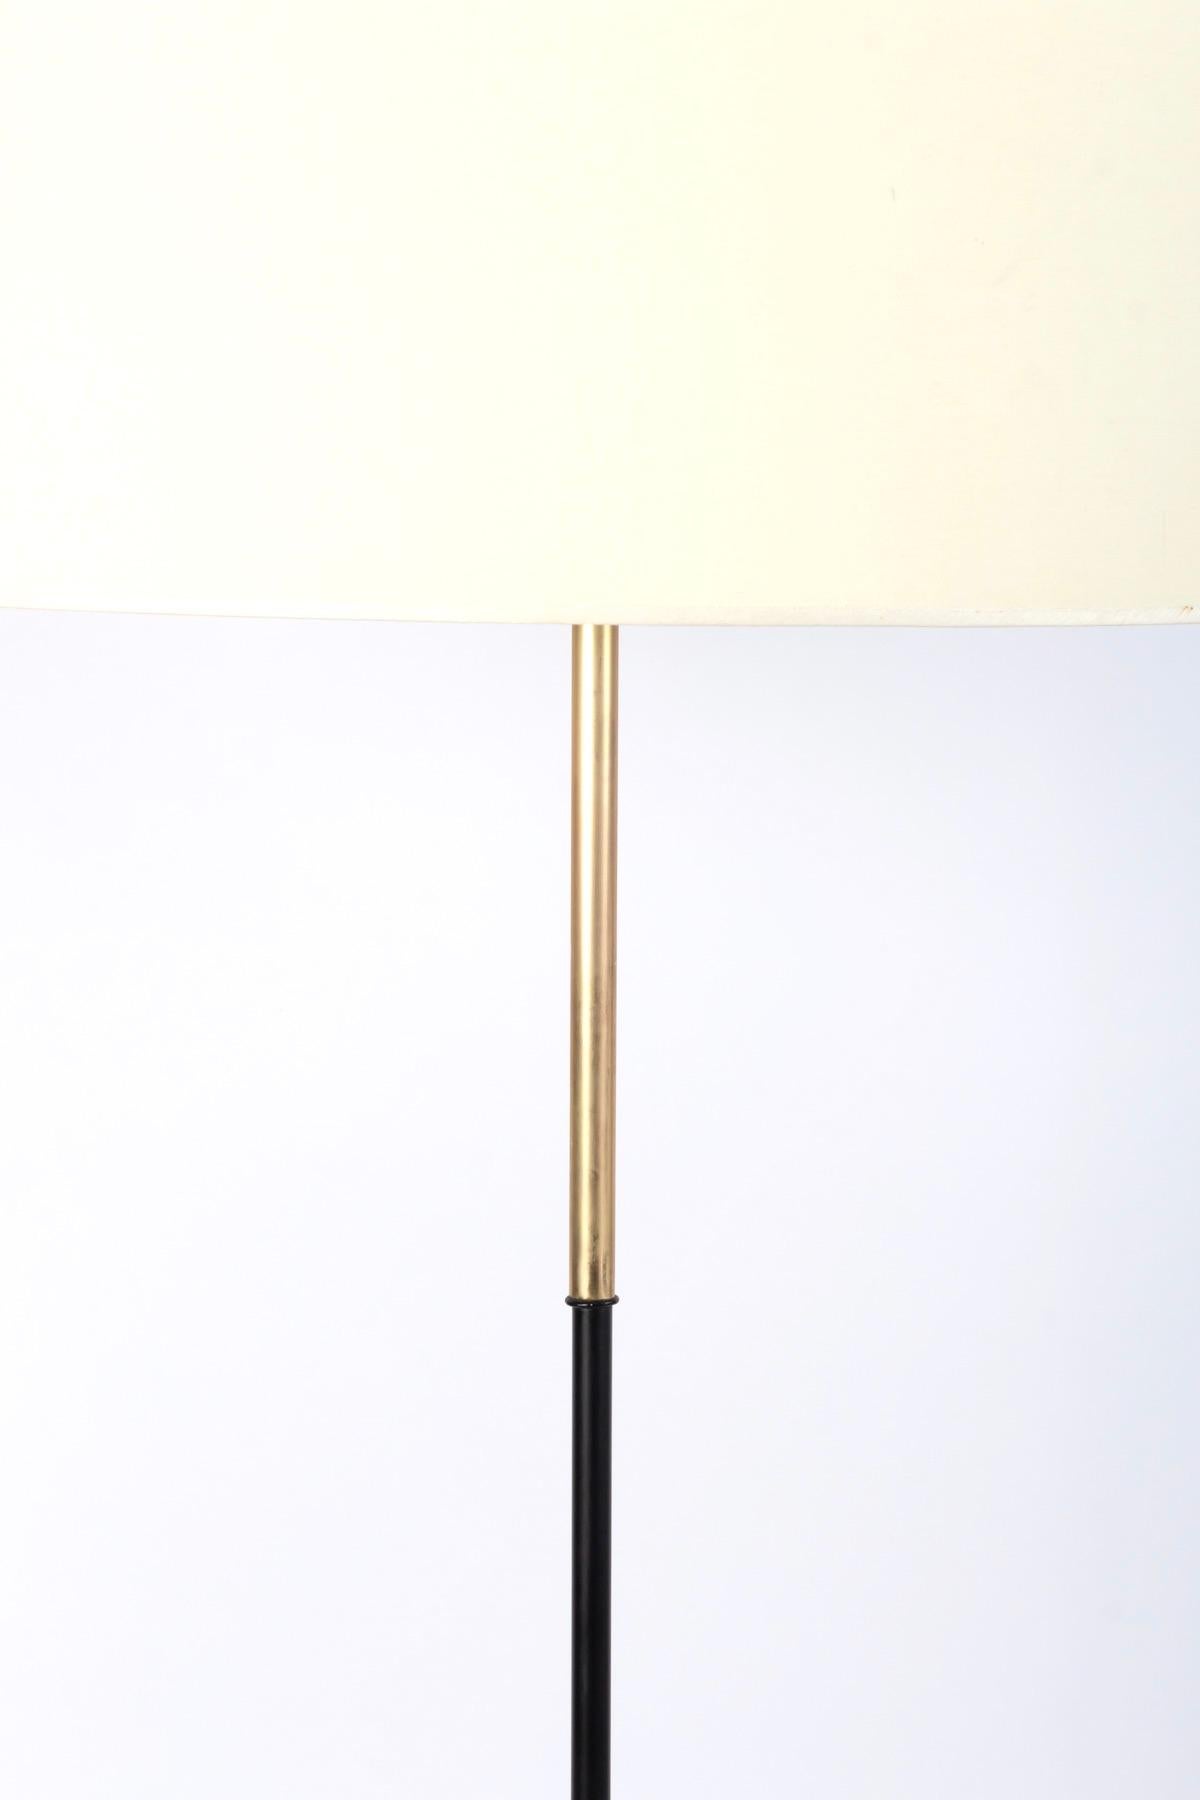 1950 floor lamp from Maison Arlus.
Composed of a black wrought iron rod for two thirds and a third on the upper part of a gilded brass rod resting on a black wrought iron tripod of round section.
the feet are shod in gilded brass.
Lampshade made to